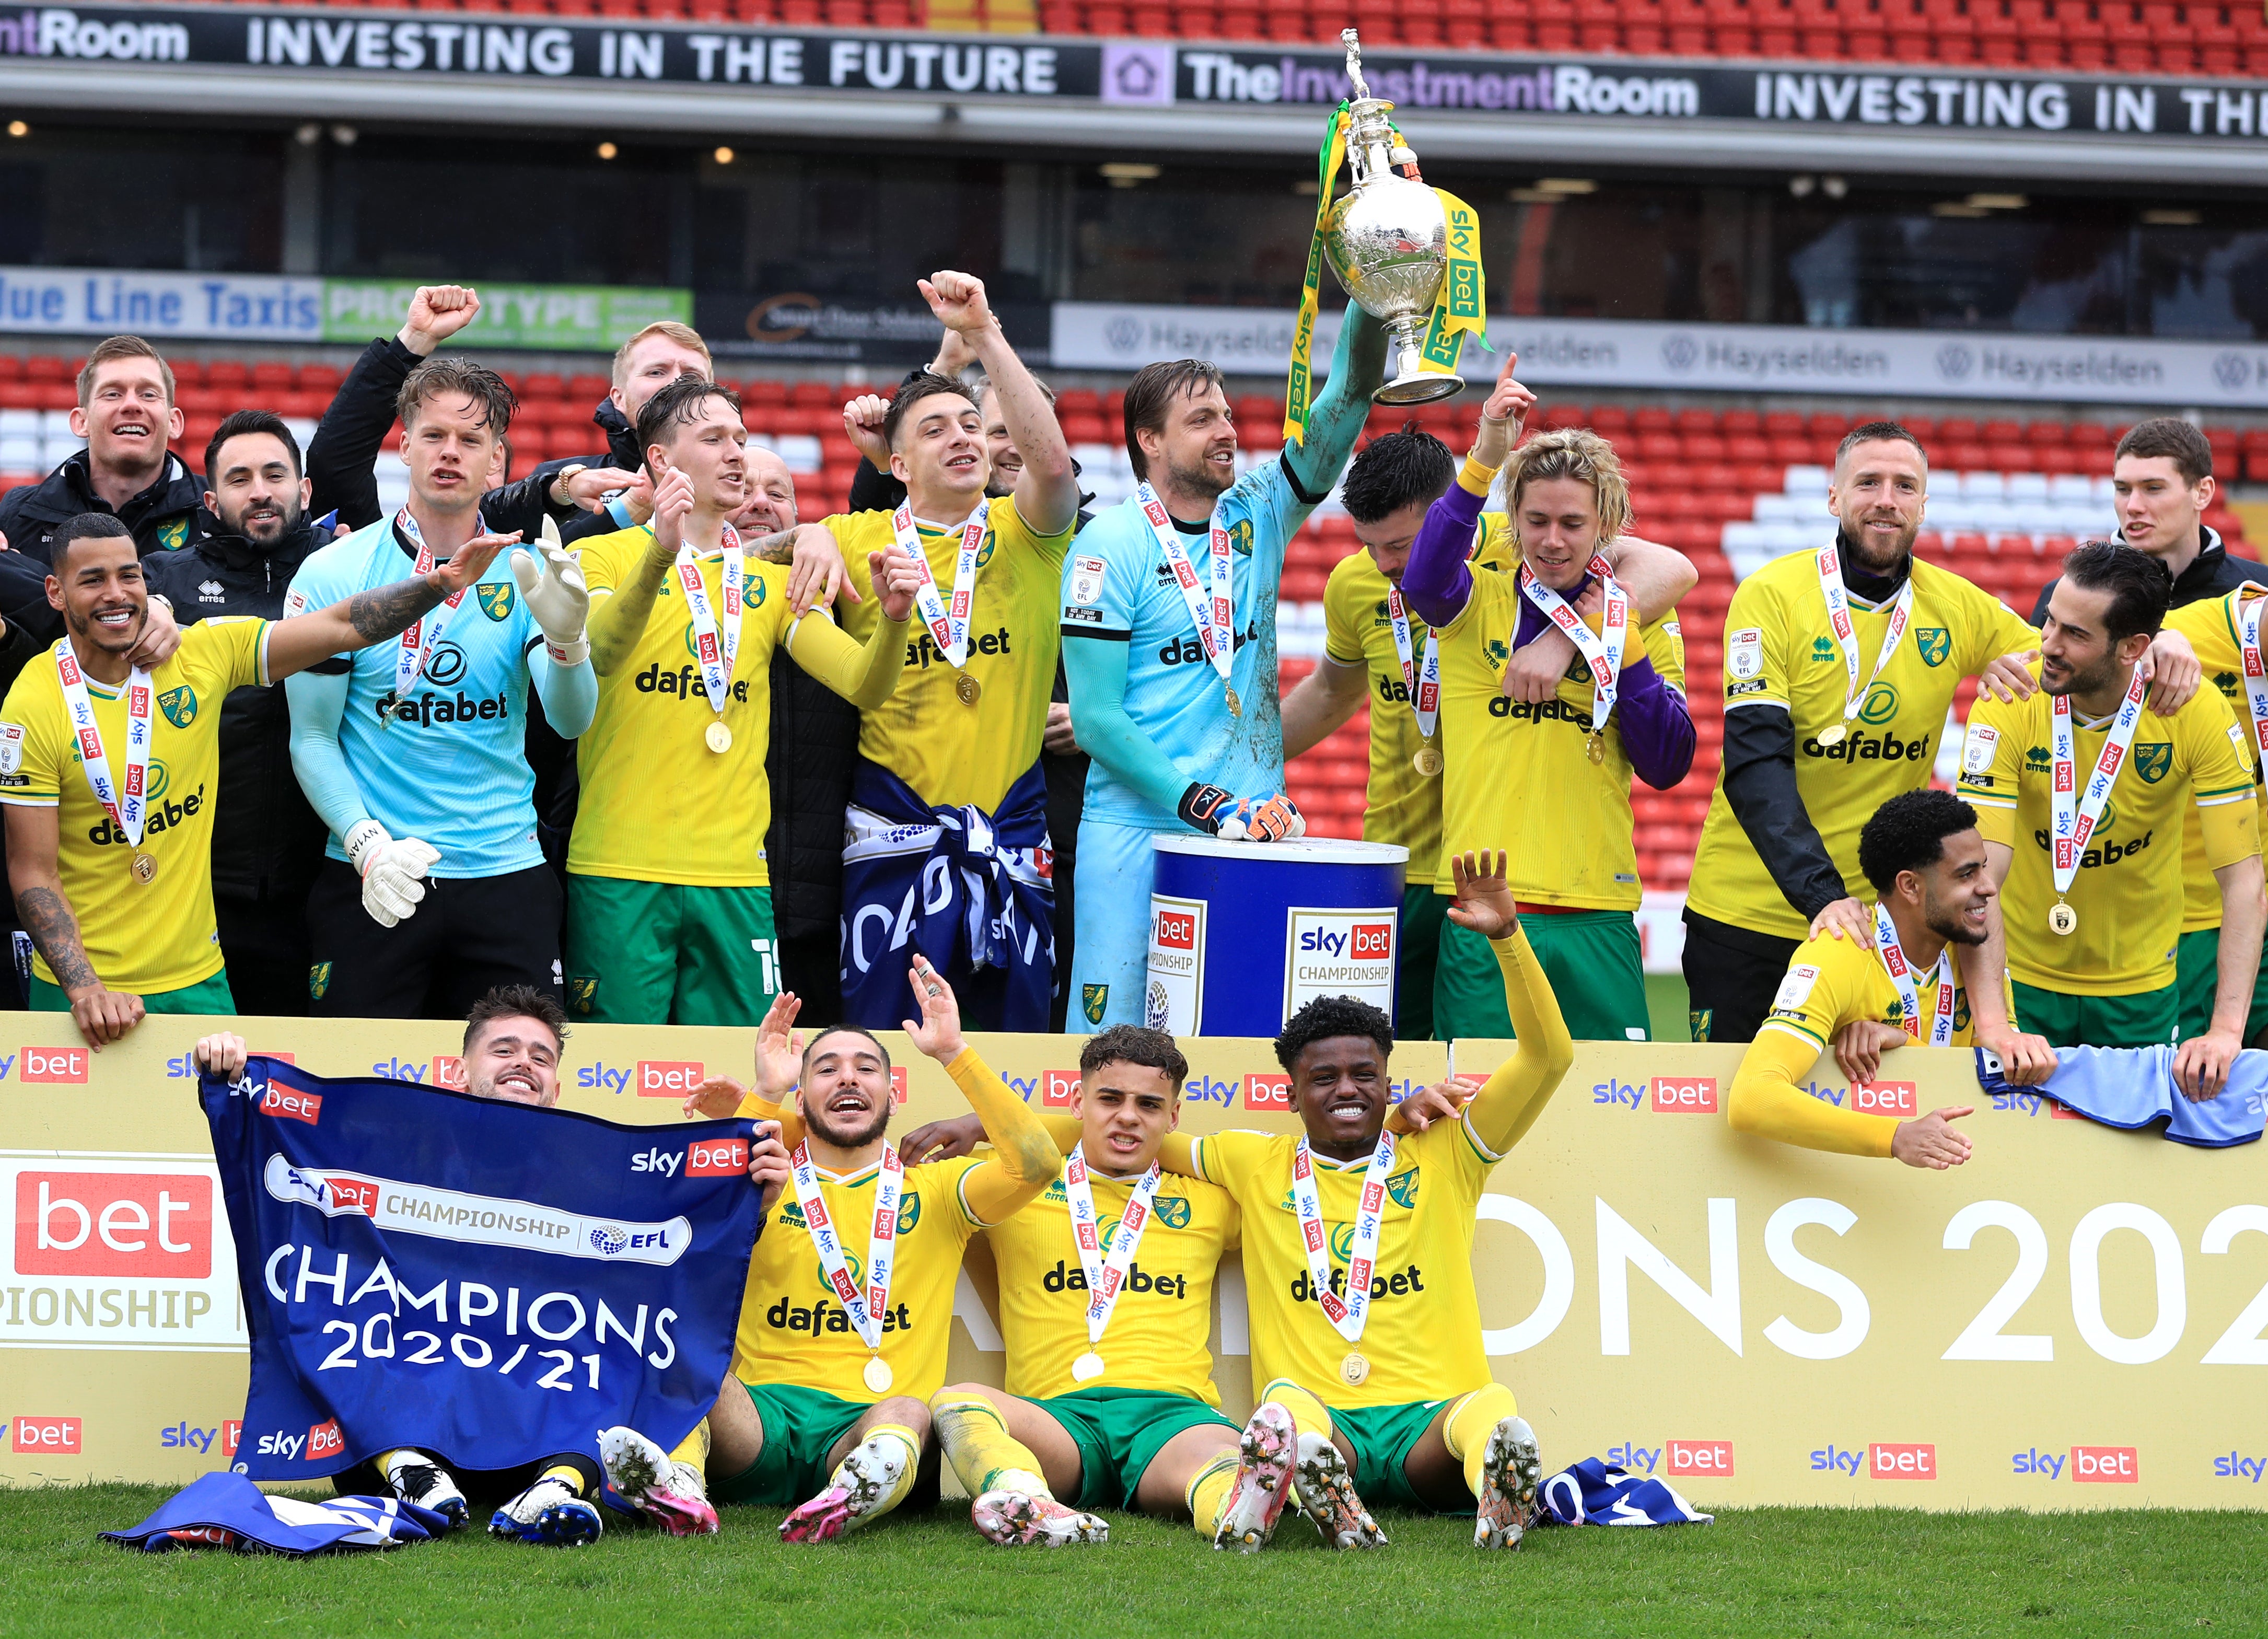 Norwich lift the Championship trophy